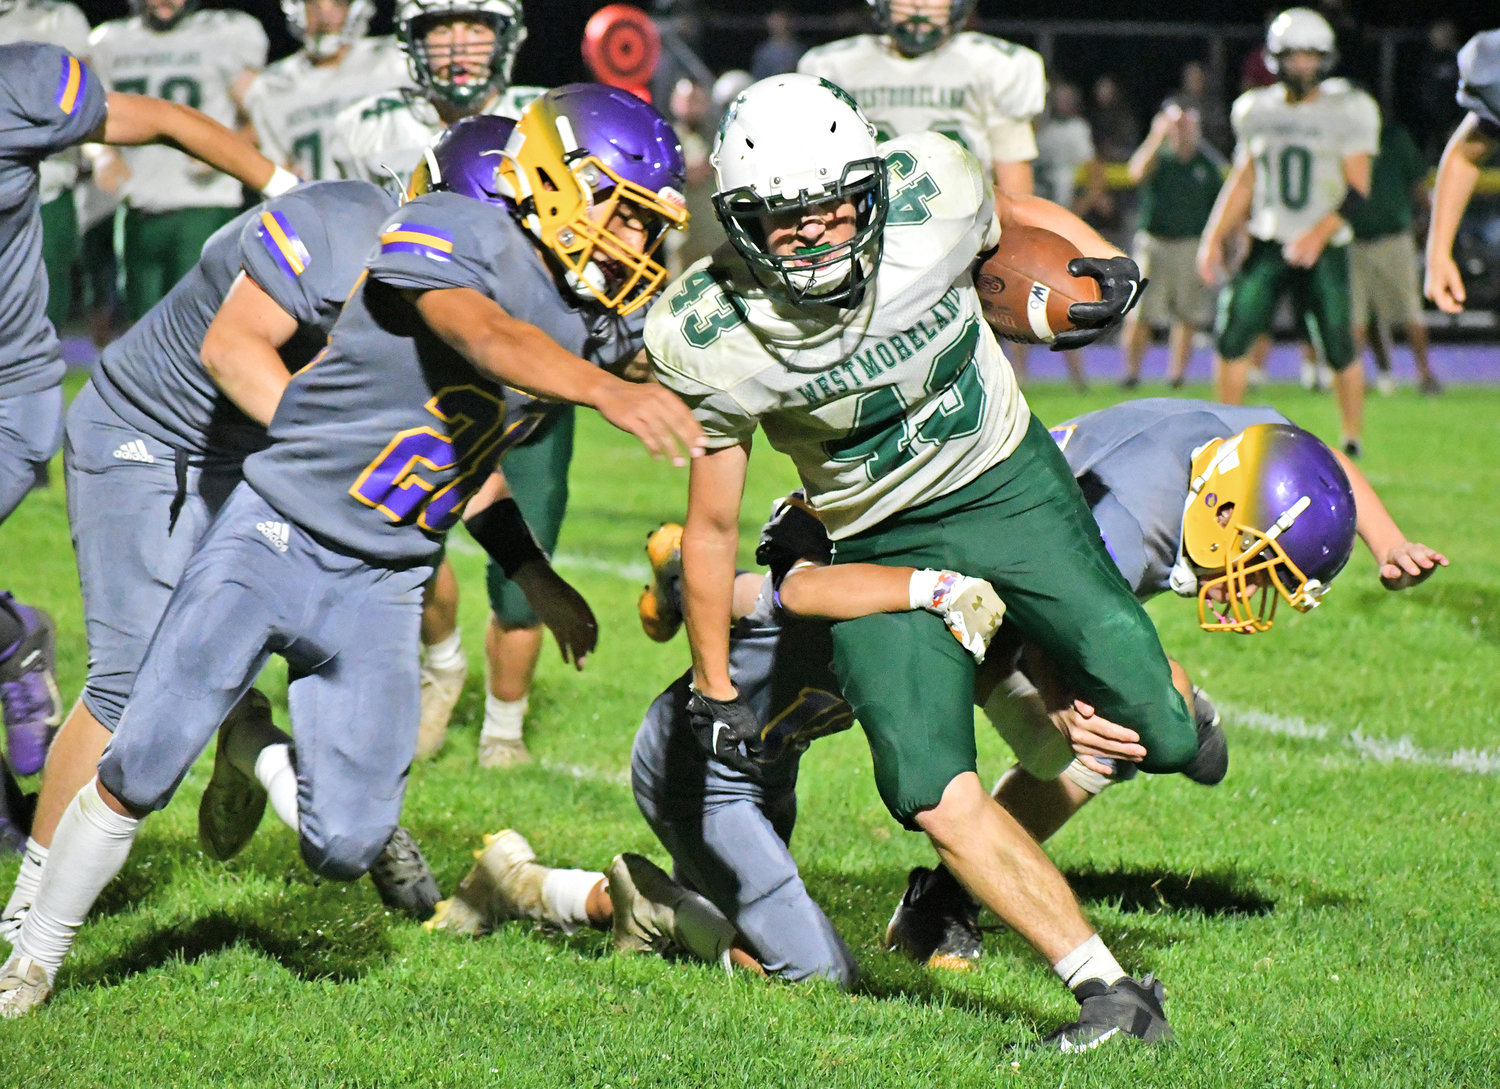 Westmoreland-Oriskany running back Jack Williams is swarmed by Holland Patent defenders in a Class C game Saturday at Holland Patent. Williams scored the Bulldogs’ lone touchdown in a 43-8 loss.